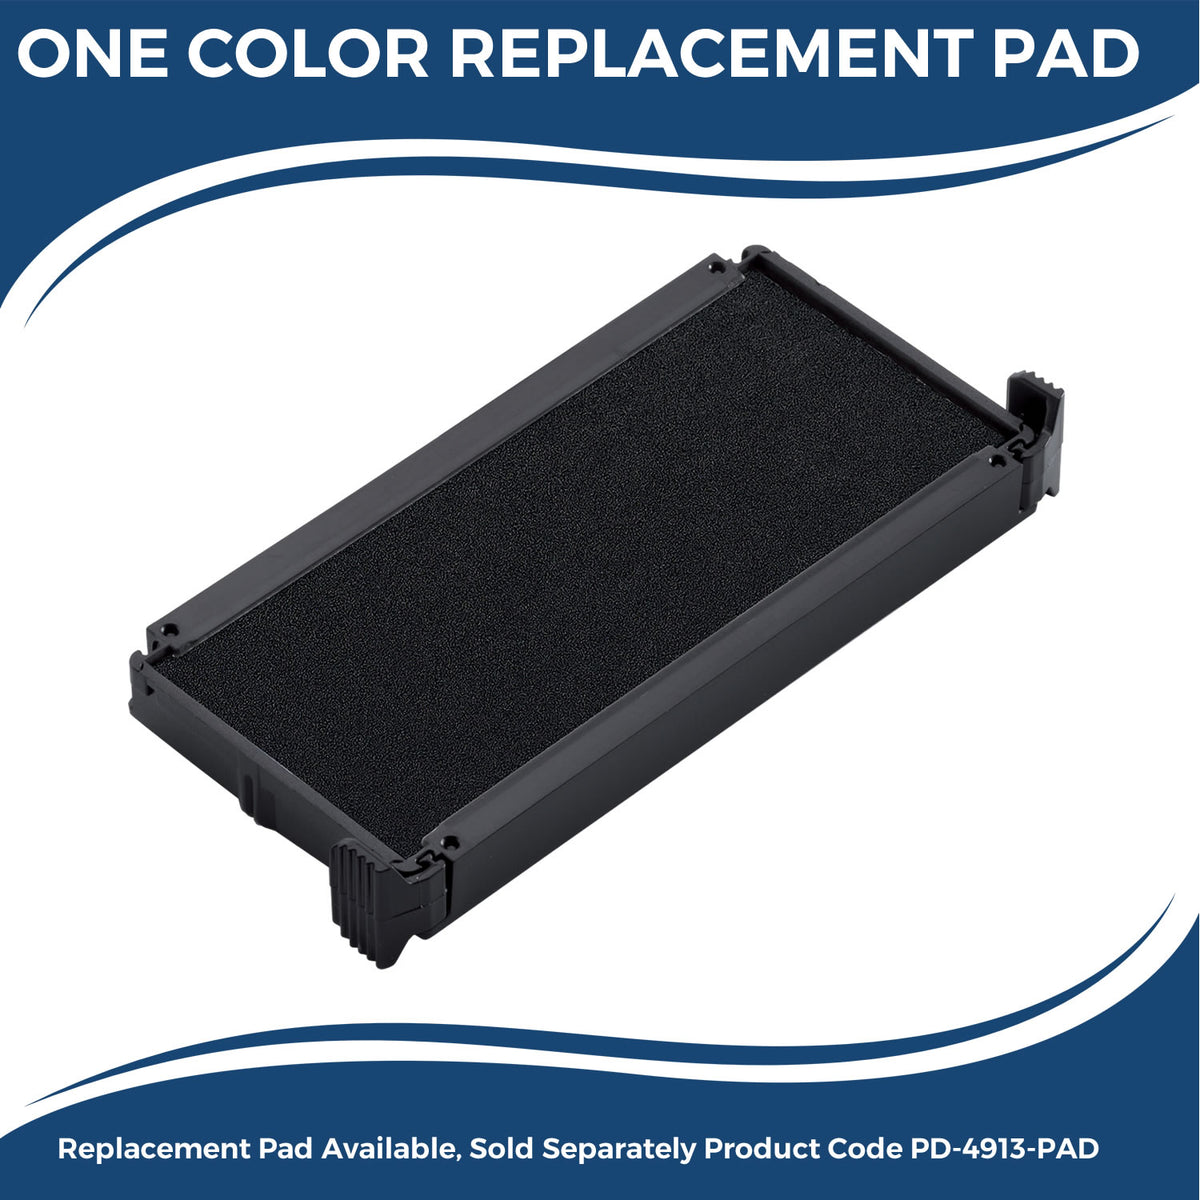 Large Self Inking Personal Confidential Stamp 4143S Large Replacment Pad